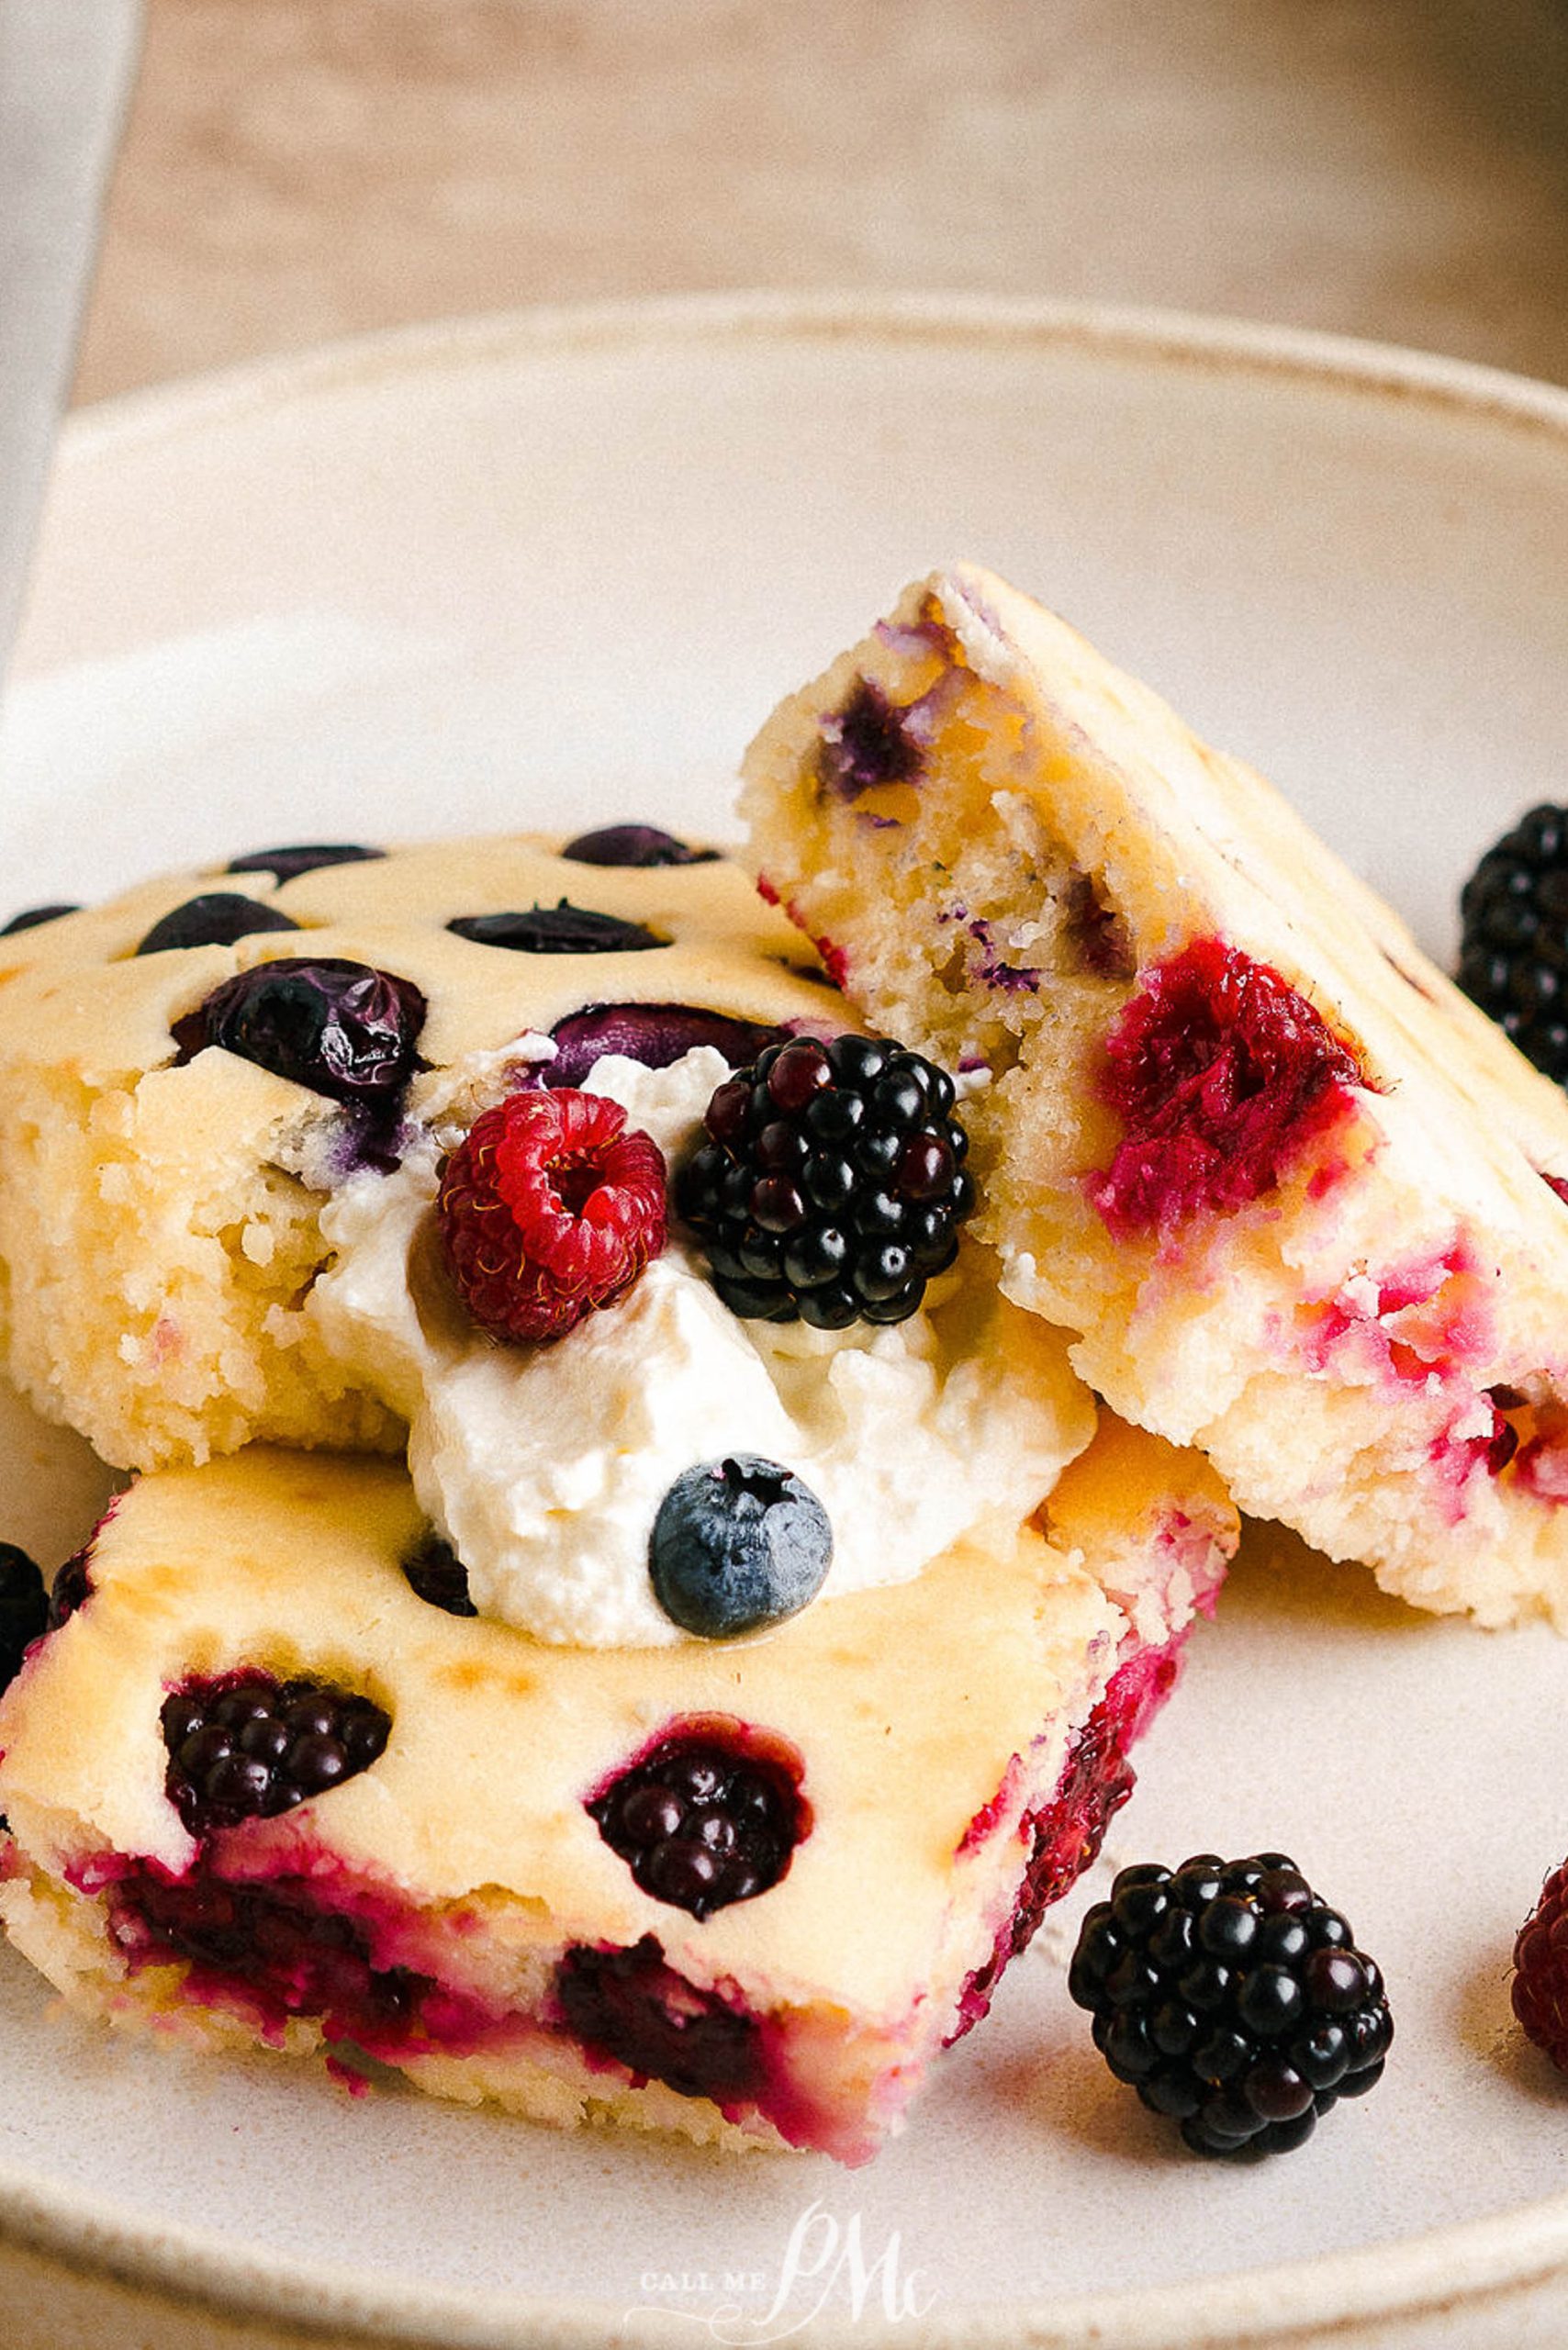 A plate of sheet pan pancakes with whipped cream and berries.